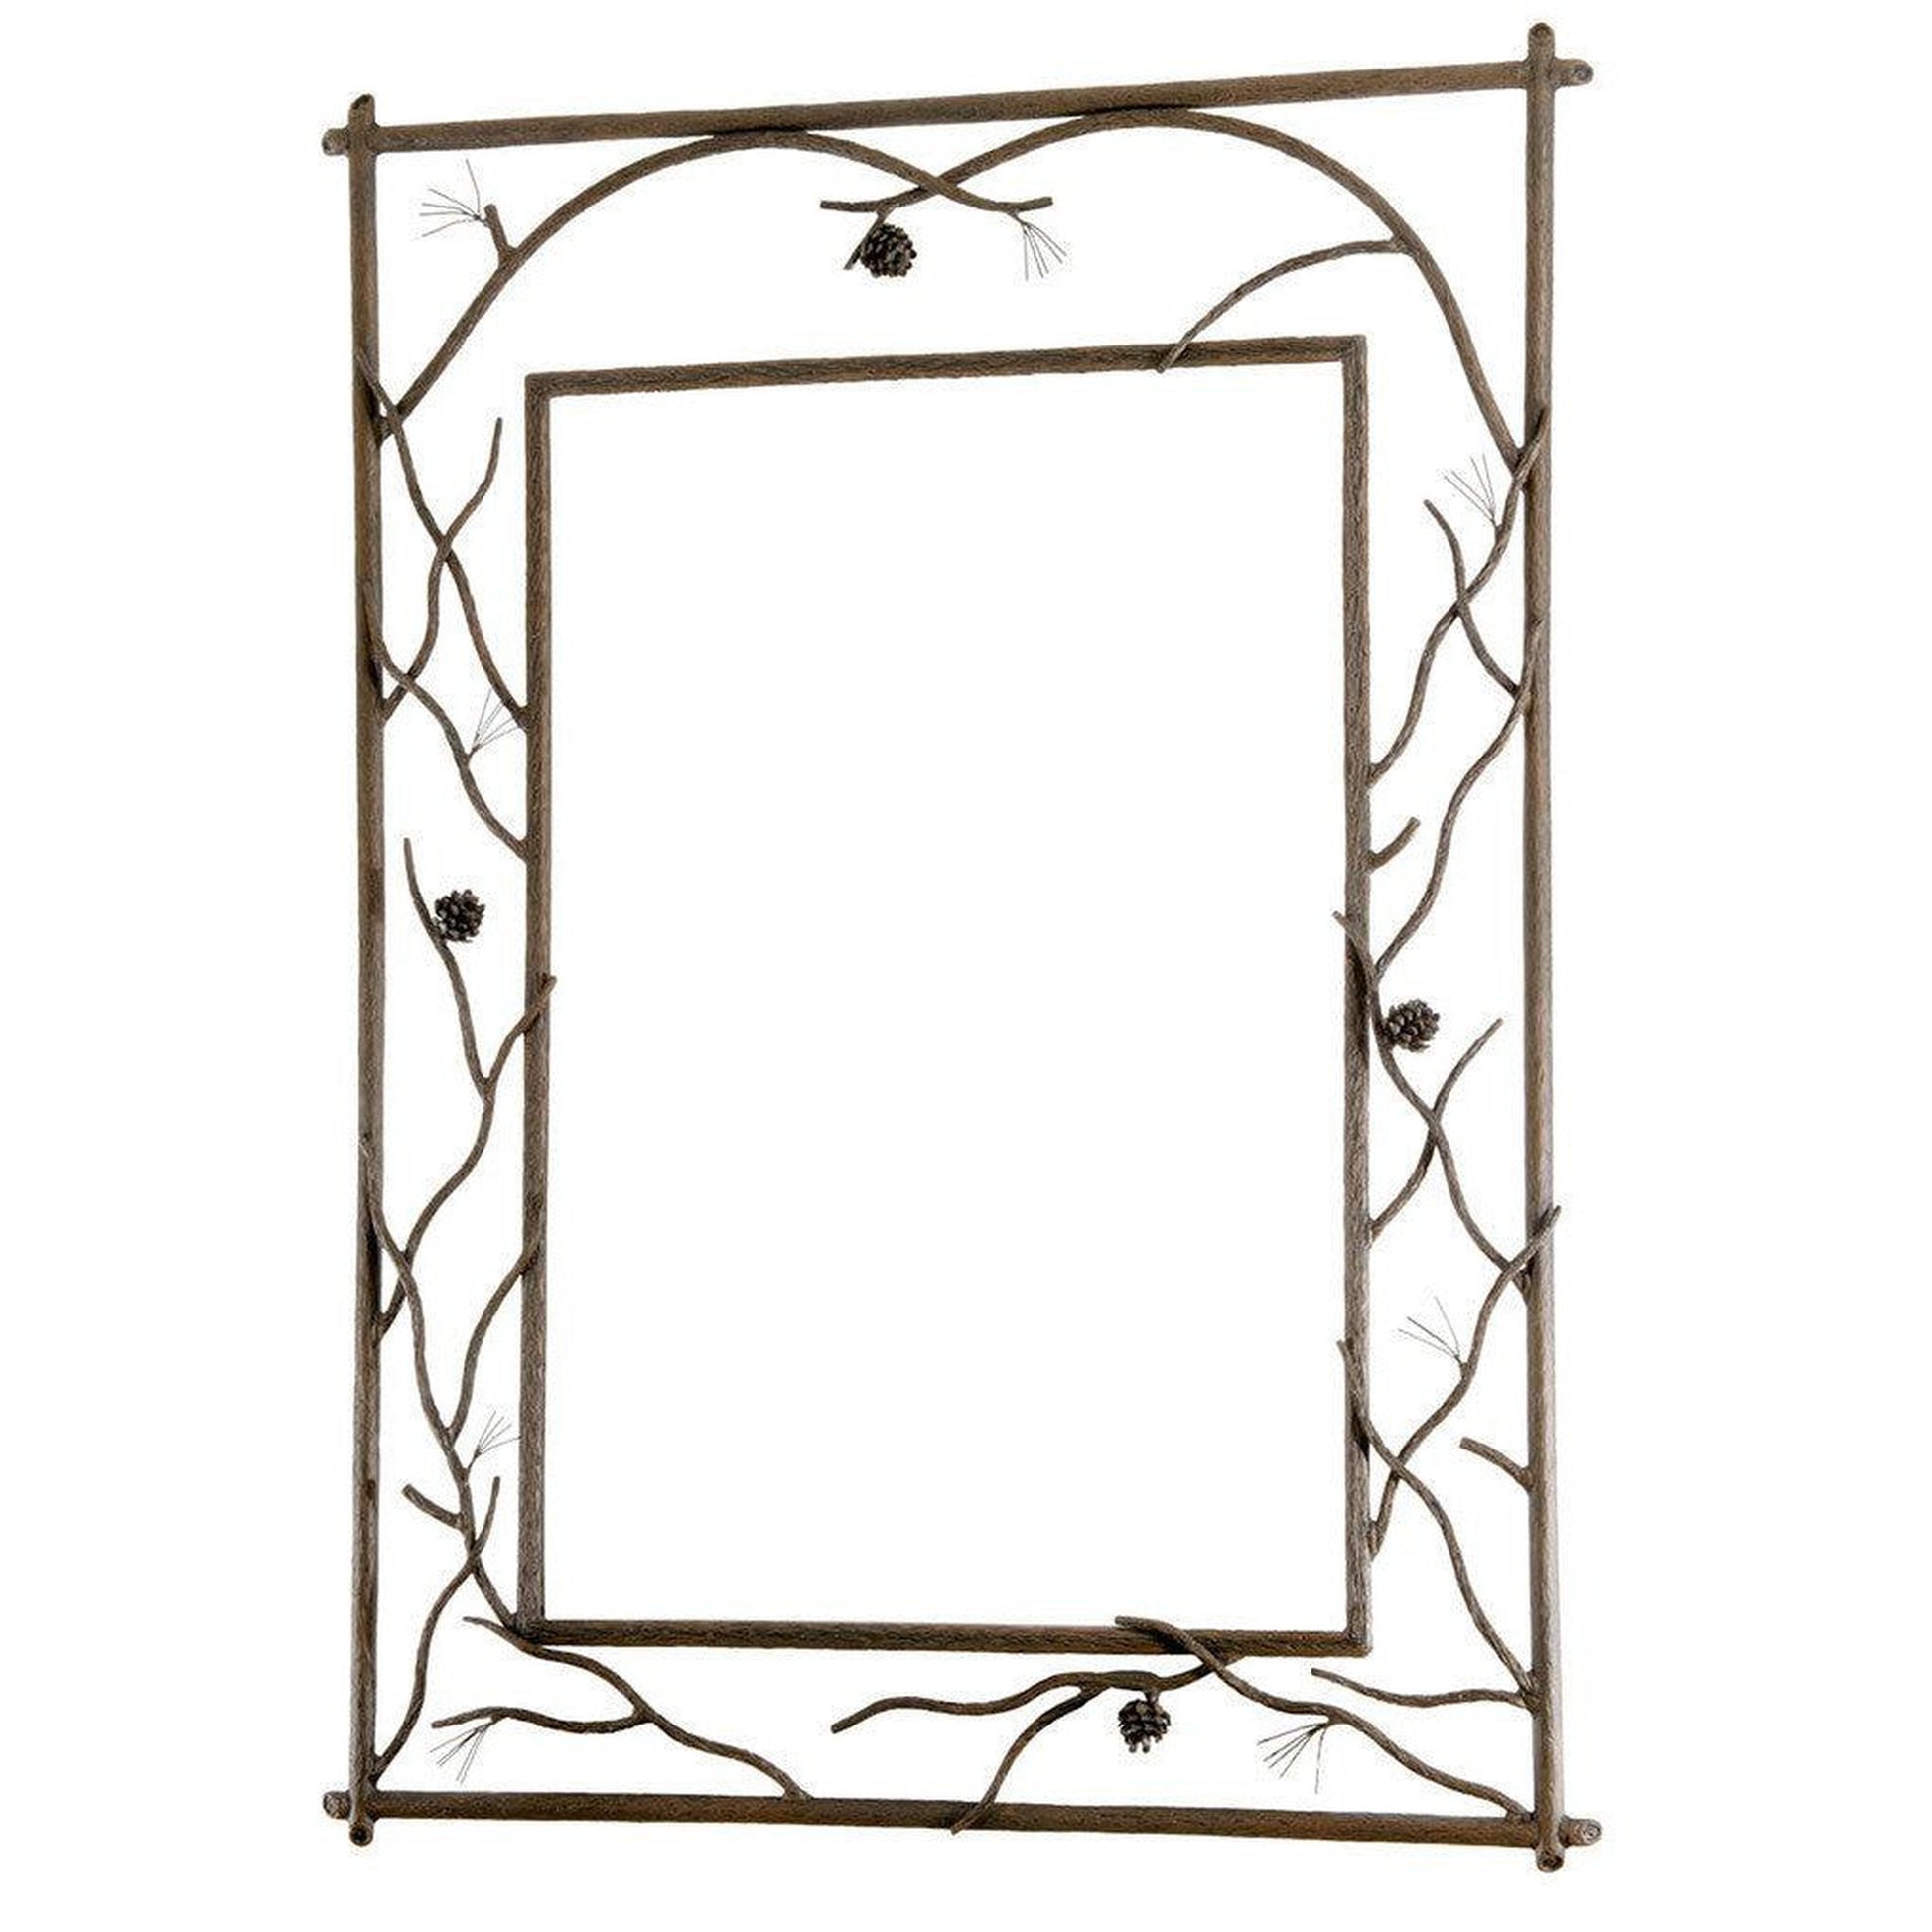 Stone County Ironworks Pine 37" x 51" Large Satin Black Branched Iron Wall Mirror With Copper Iron Accent